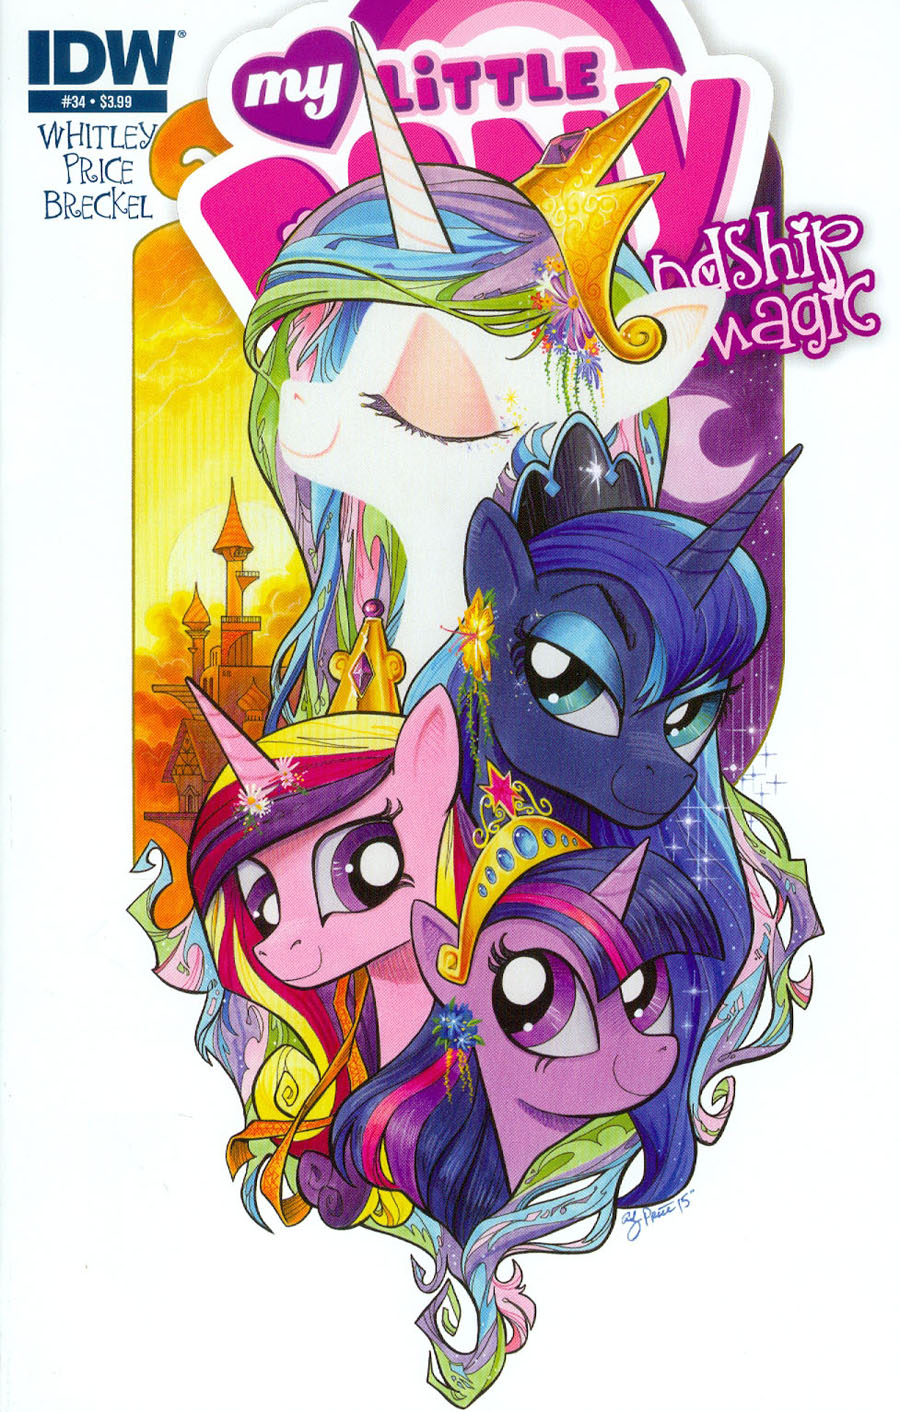 My Little Pony Friendship Is Magic #34 Cover A Regular Andy Price Cover